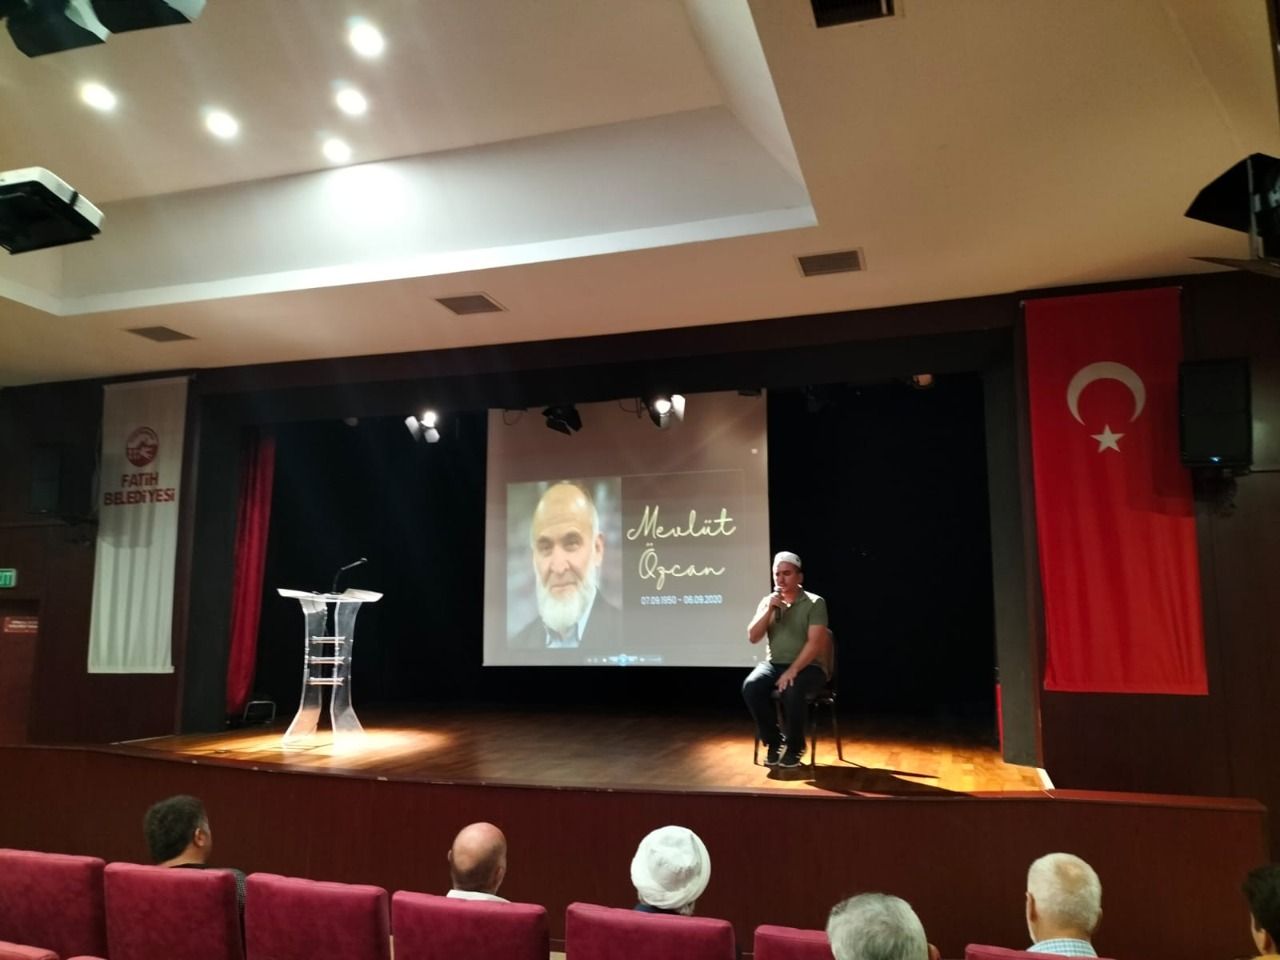 Mevlüt Özcan commemorated with mercy: “He was always on the right path”